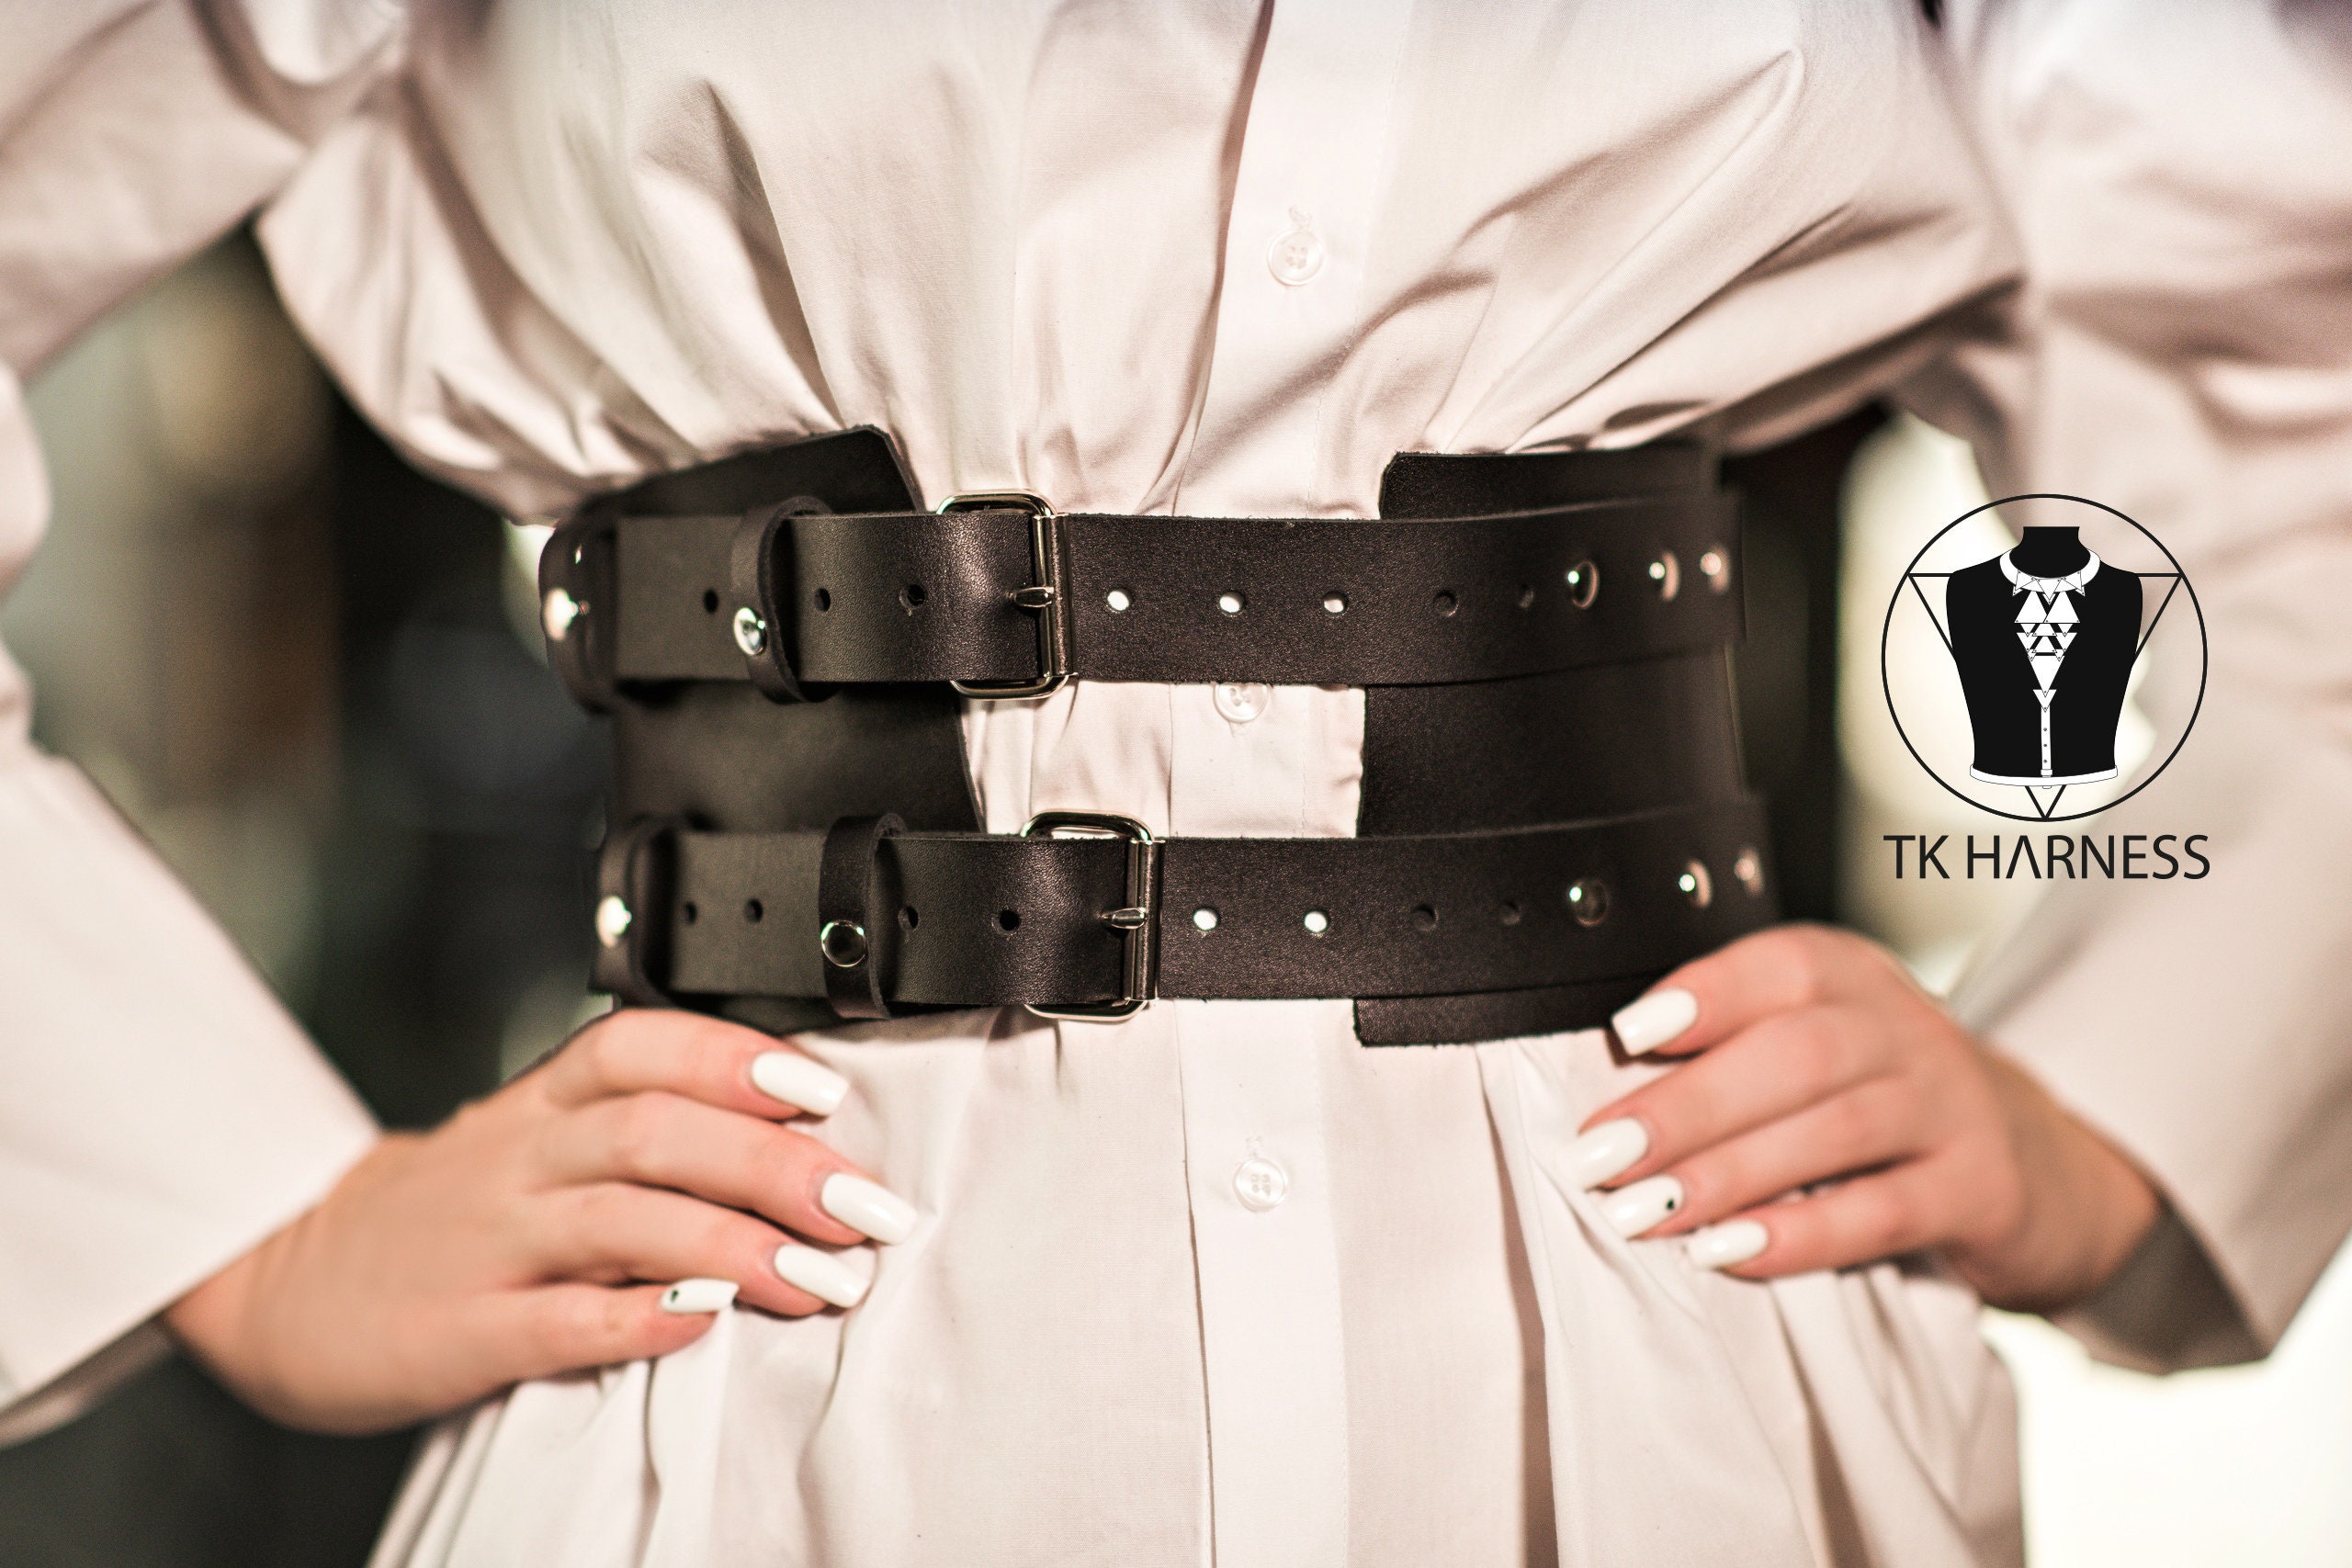 Black and white corset belt with zipper Archives - STYLE DU MONDE